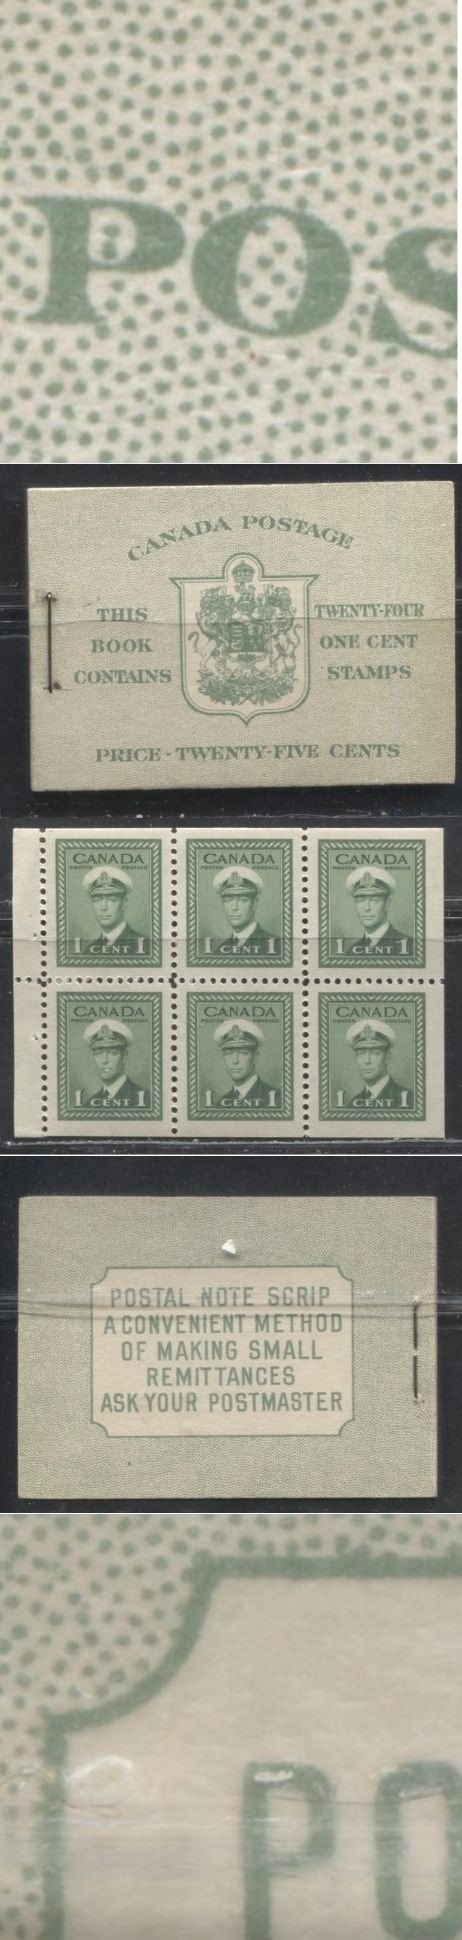 Lot 237 Canada #BK32d 1942-1949 War Issue, Complete English Booklet, 4 Panes of 1c Green, Ribbed Vertical Wove Paper, Harris Front Cover Type IIb, Back Cover Type Caiii, 7c & 6c Airmail Rates Page